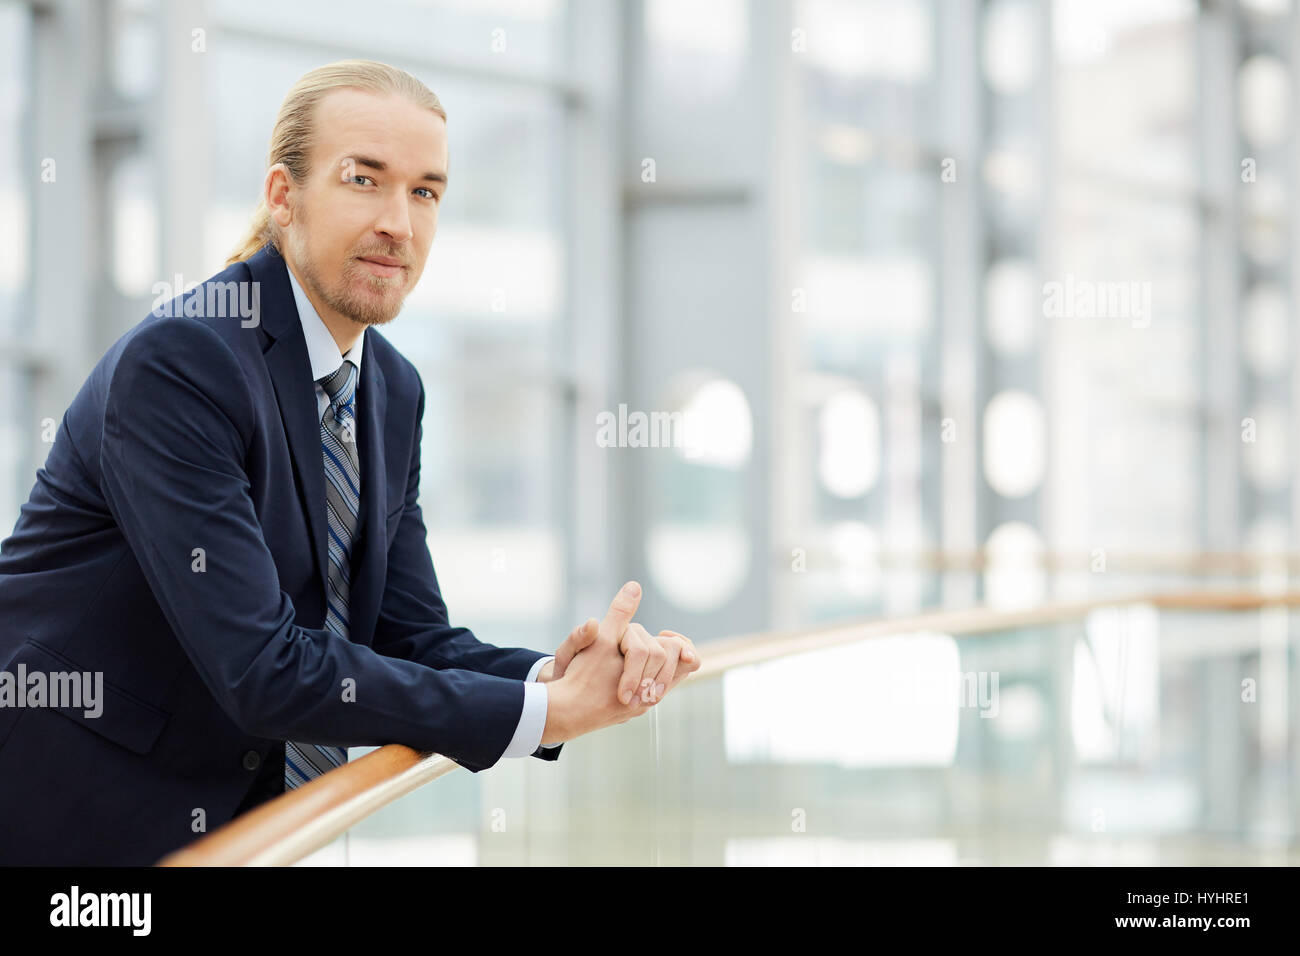 Professional in business Foto Stock